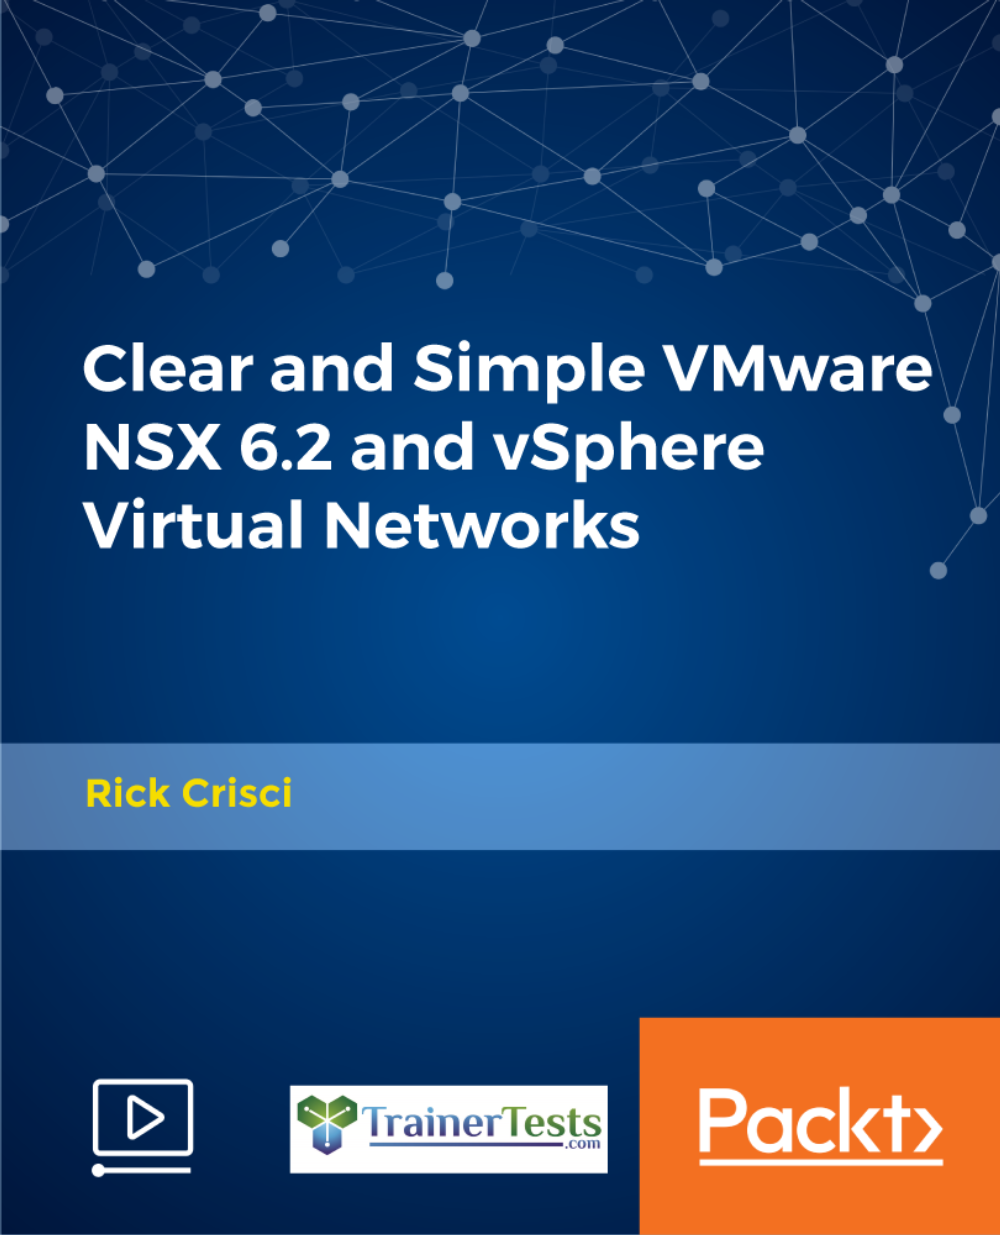 Clear and Simple VMware NSX 6.2 and vSphere Virtual Networks